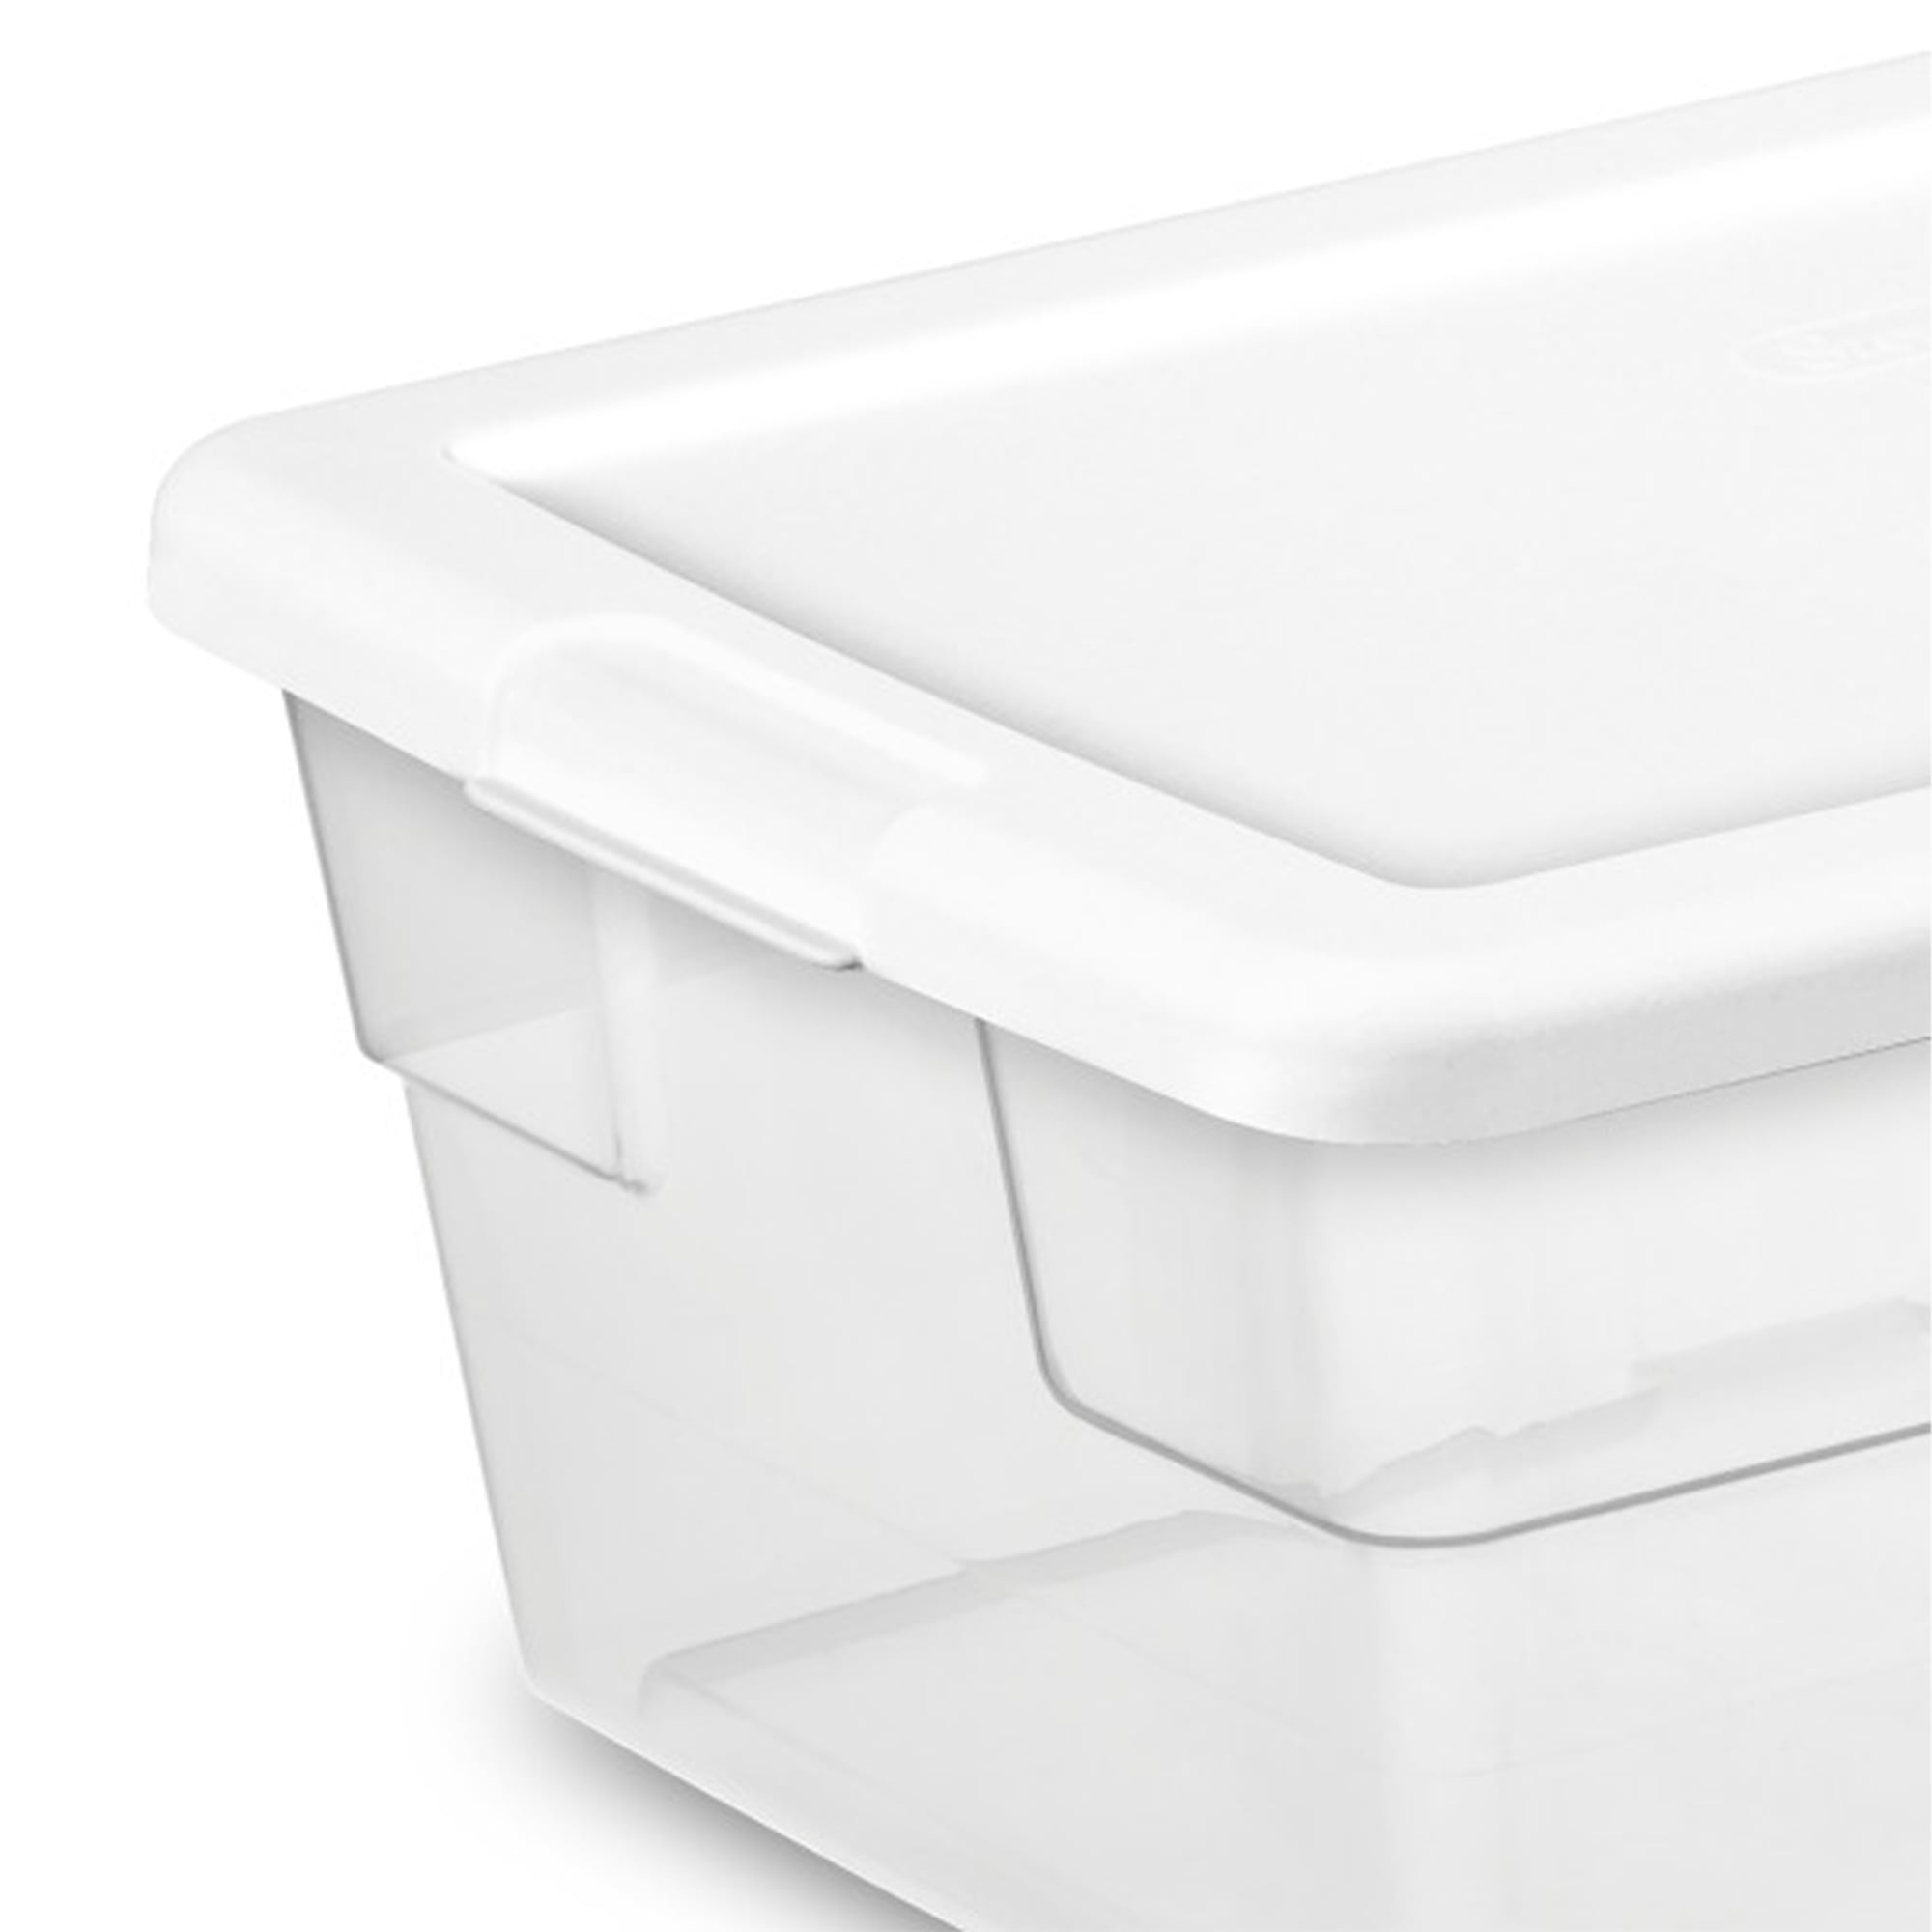 Rubbermaid 6 qt Clear Plastic Indoor Storage Tub Tote Container & Lid, 12 Pack